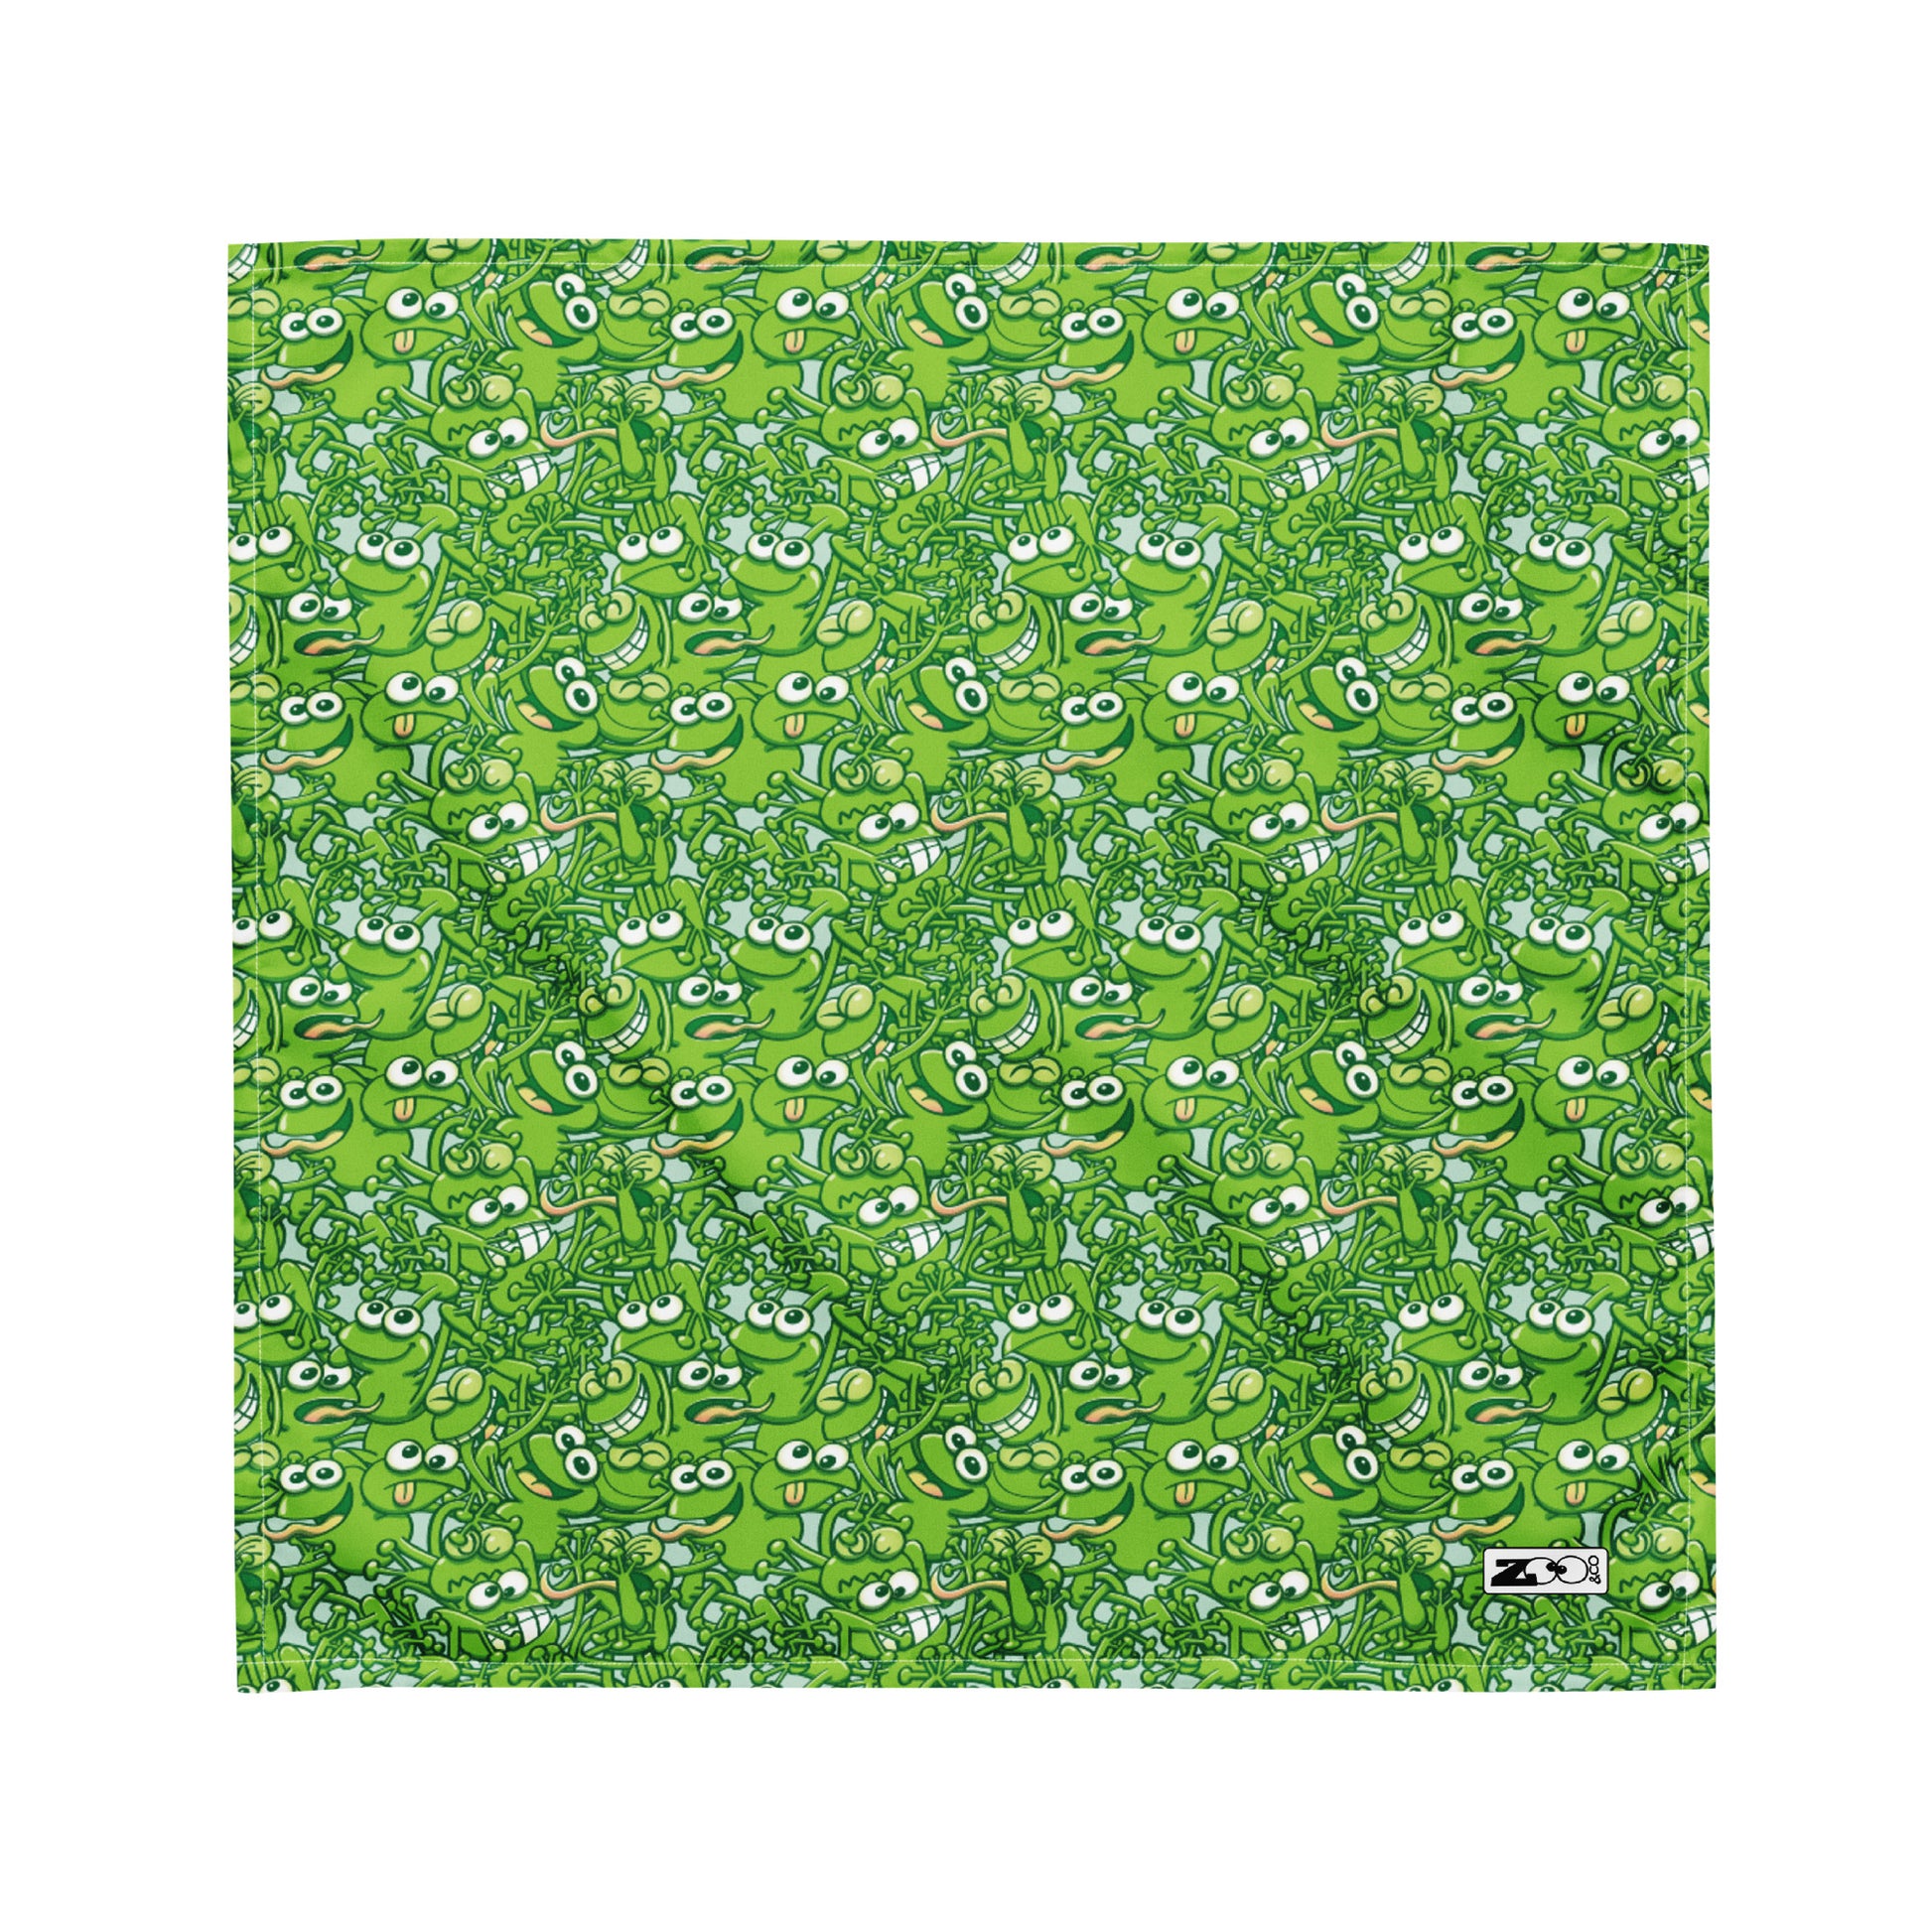 A tangled army of happy green frogs appears when the rain ends All-over print bandana. Medium size